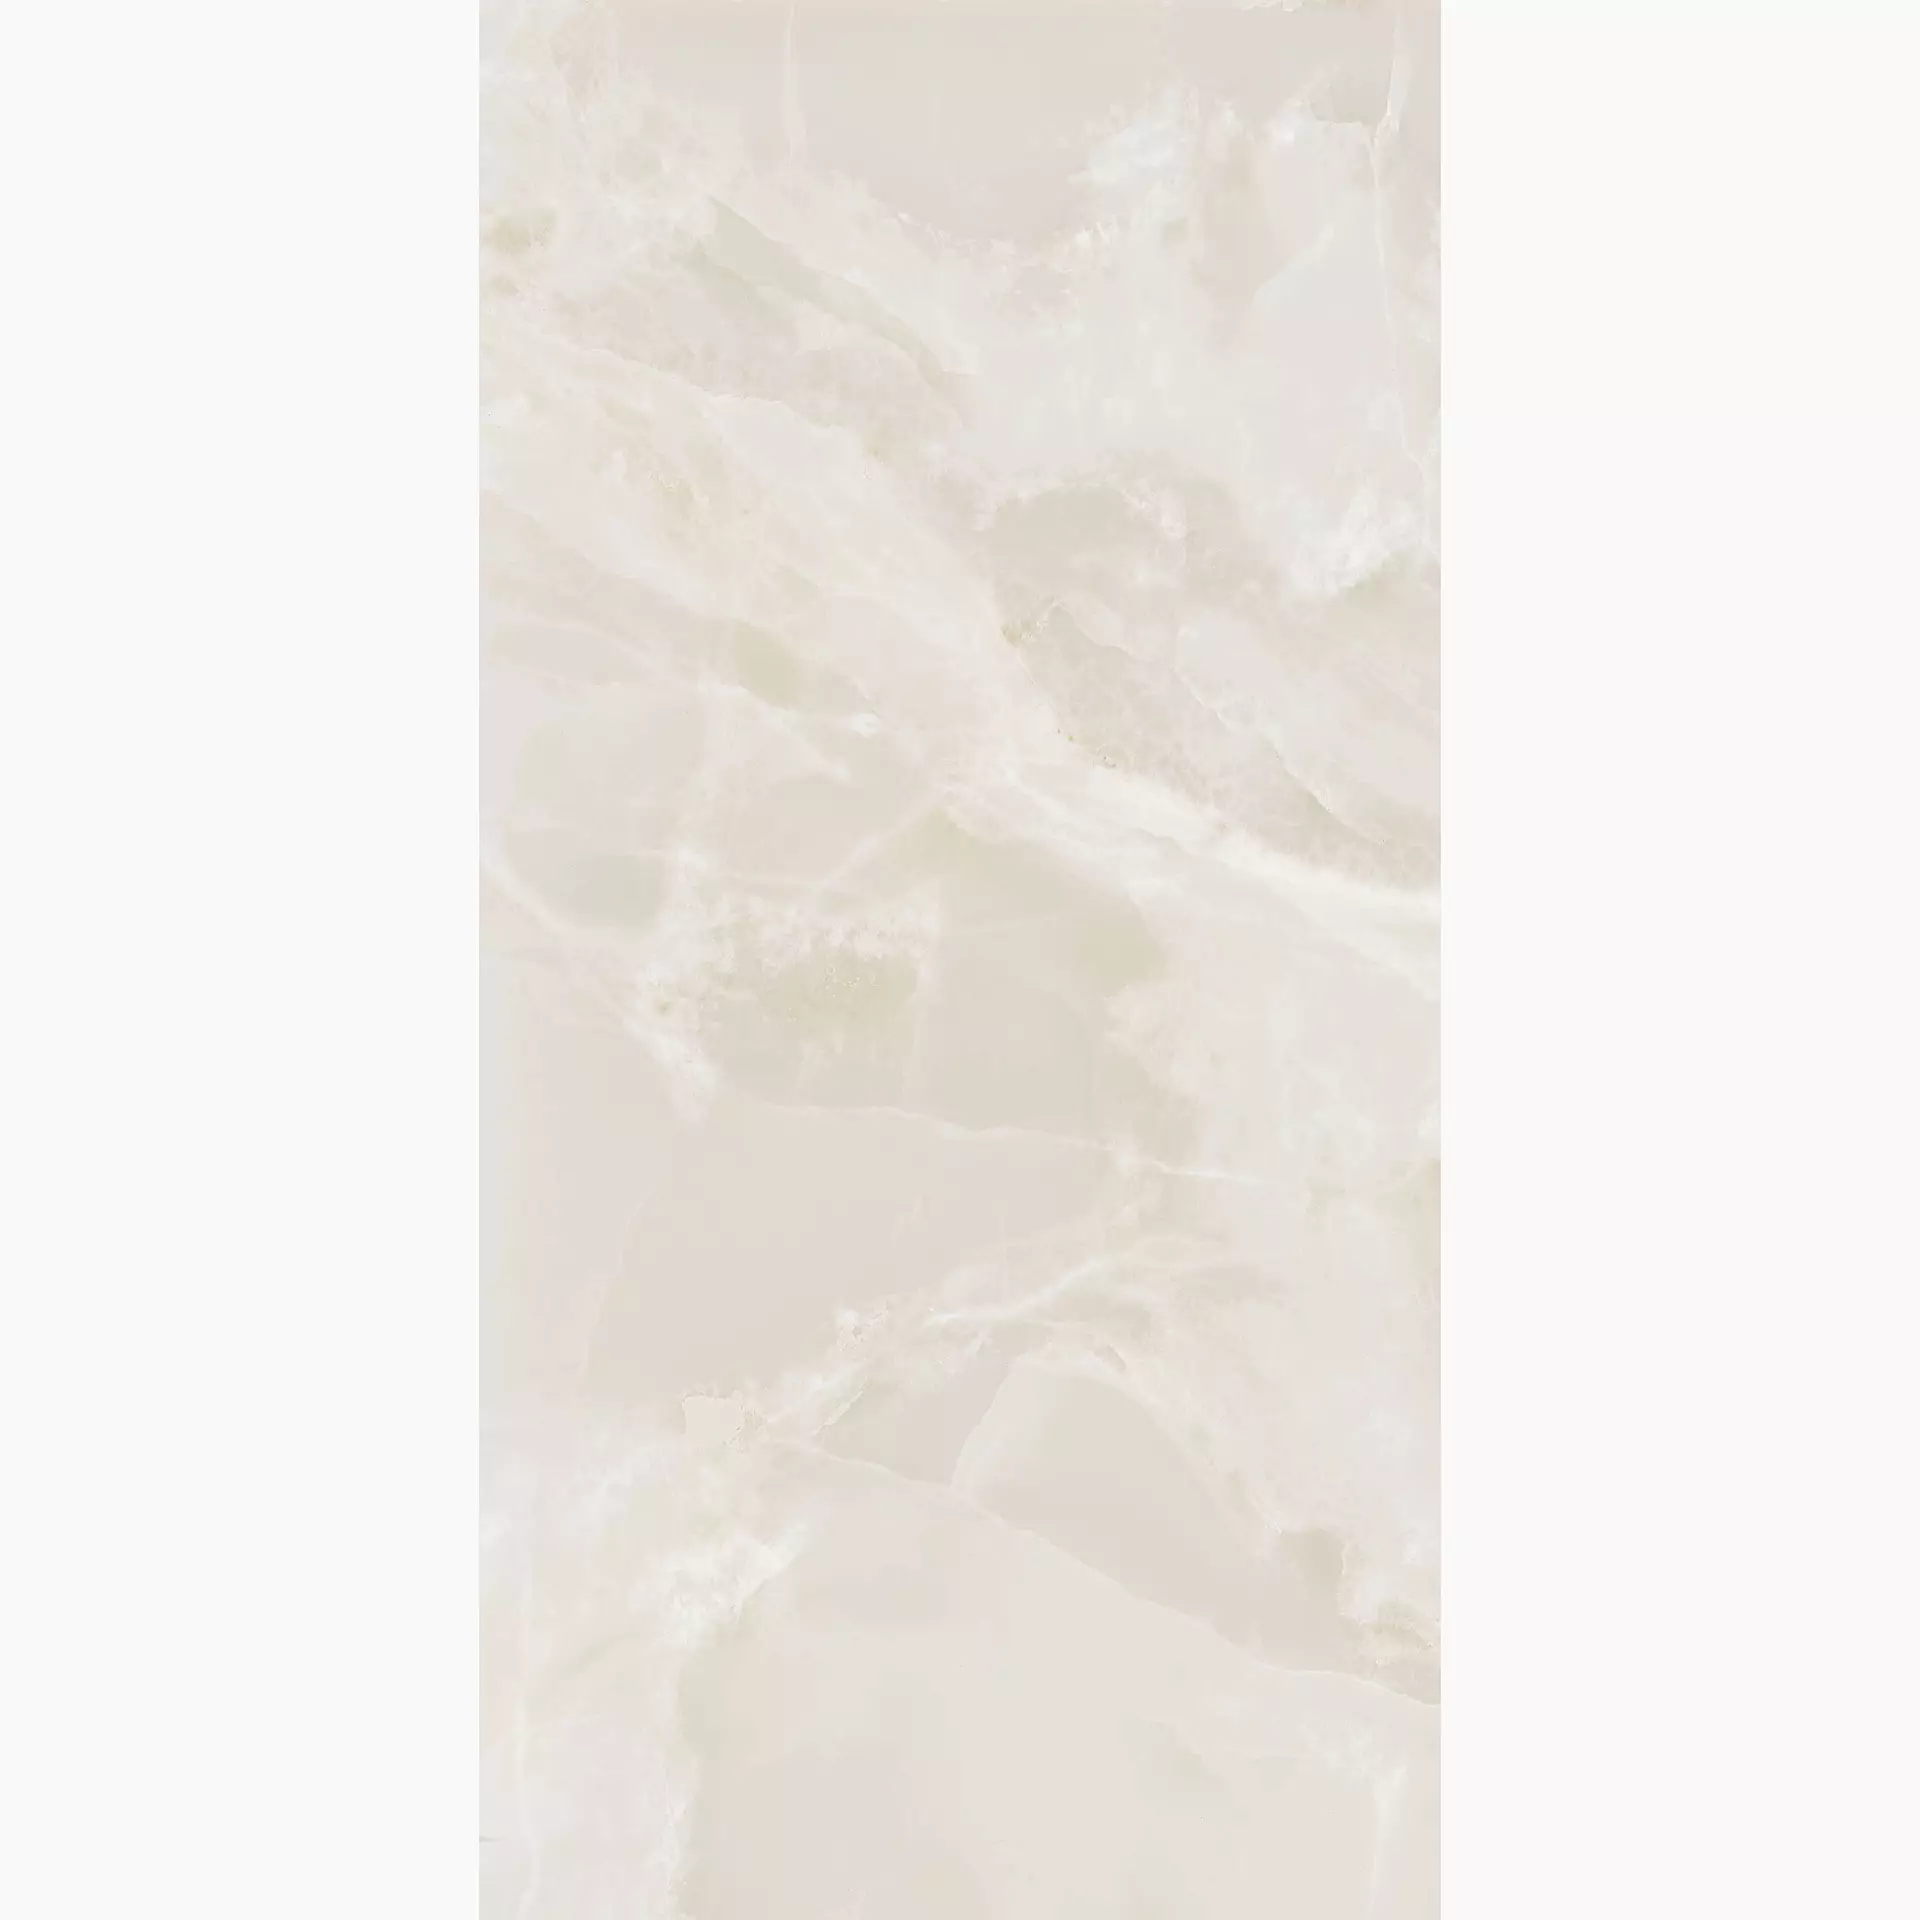 Florim Eccentric Luxe Cloudy White Glossy 778831 60x120cm rectified 6mm